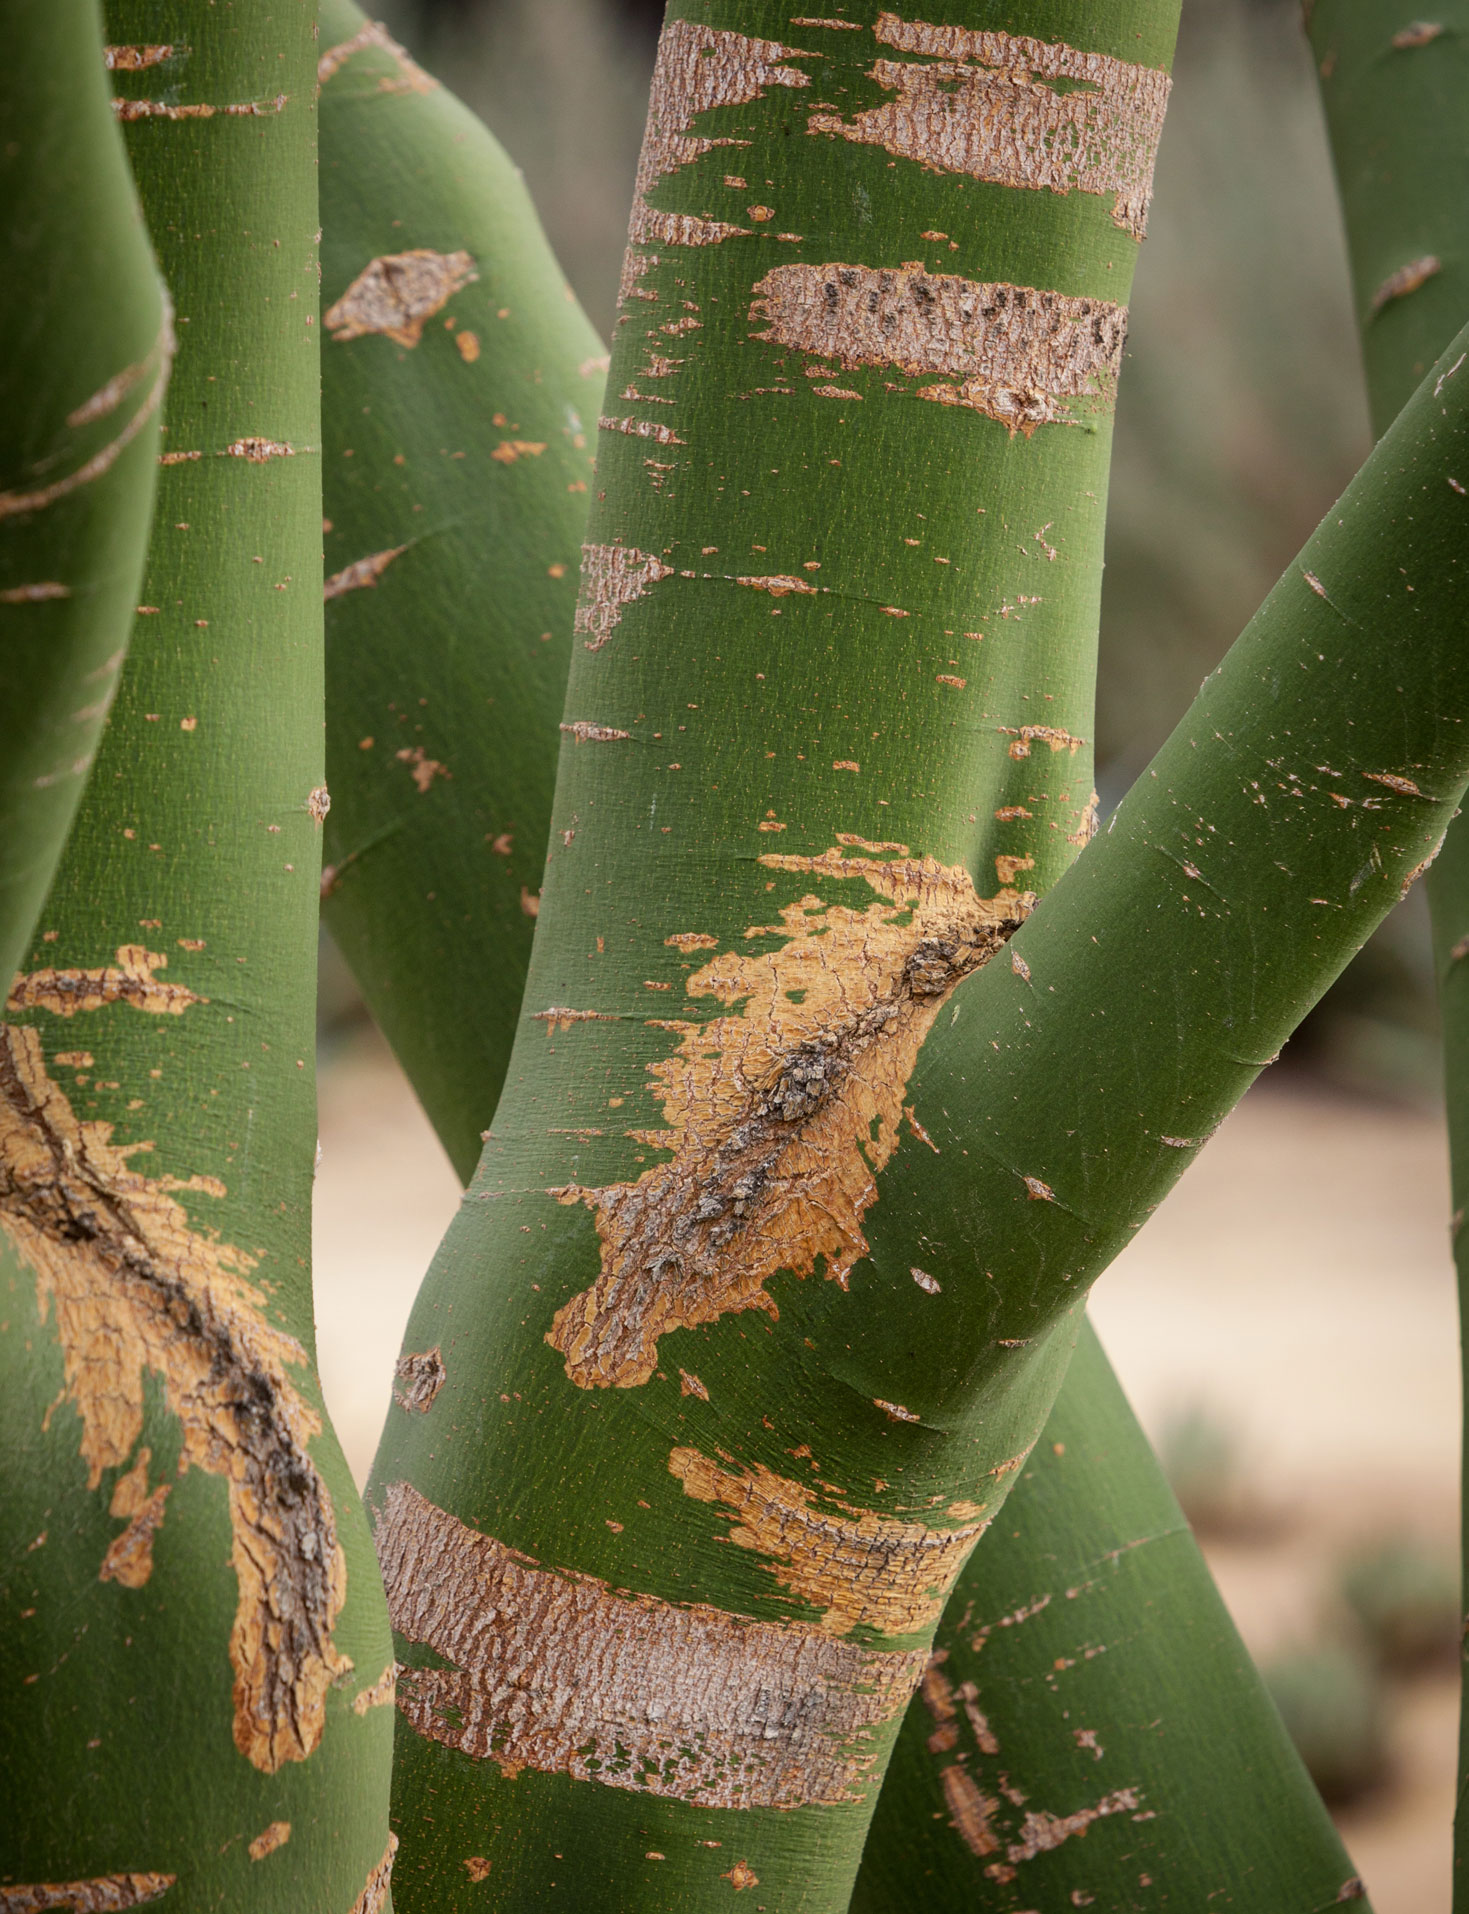 A close-up of the green bark of the Palo Verde tree.